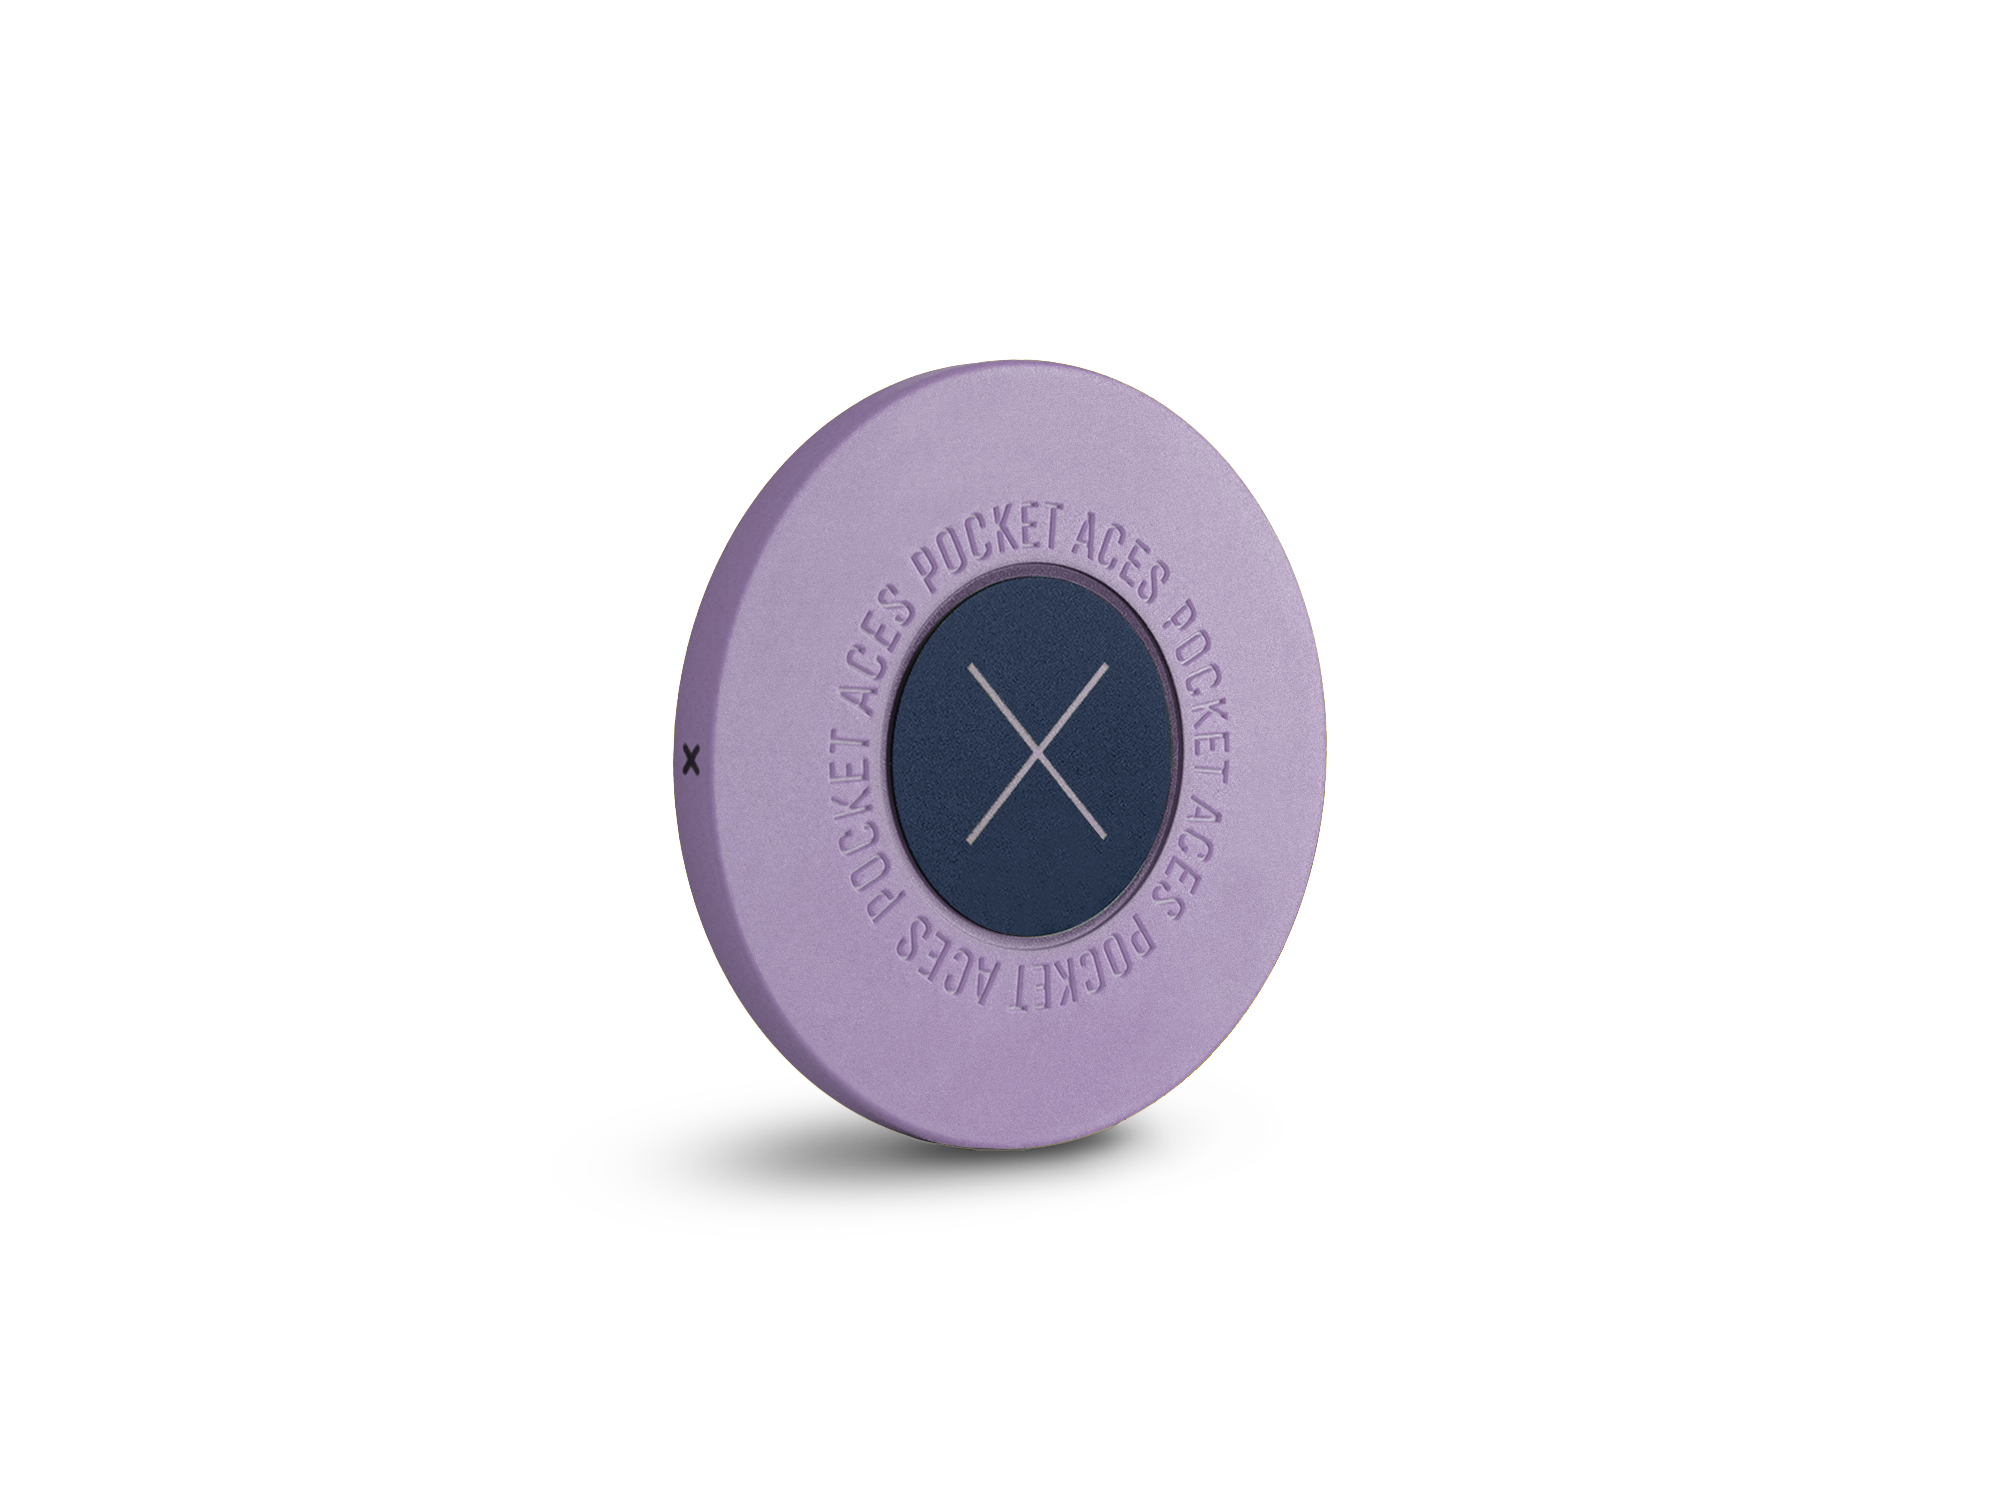 A lilac colored poker chip standing on it's edge